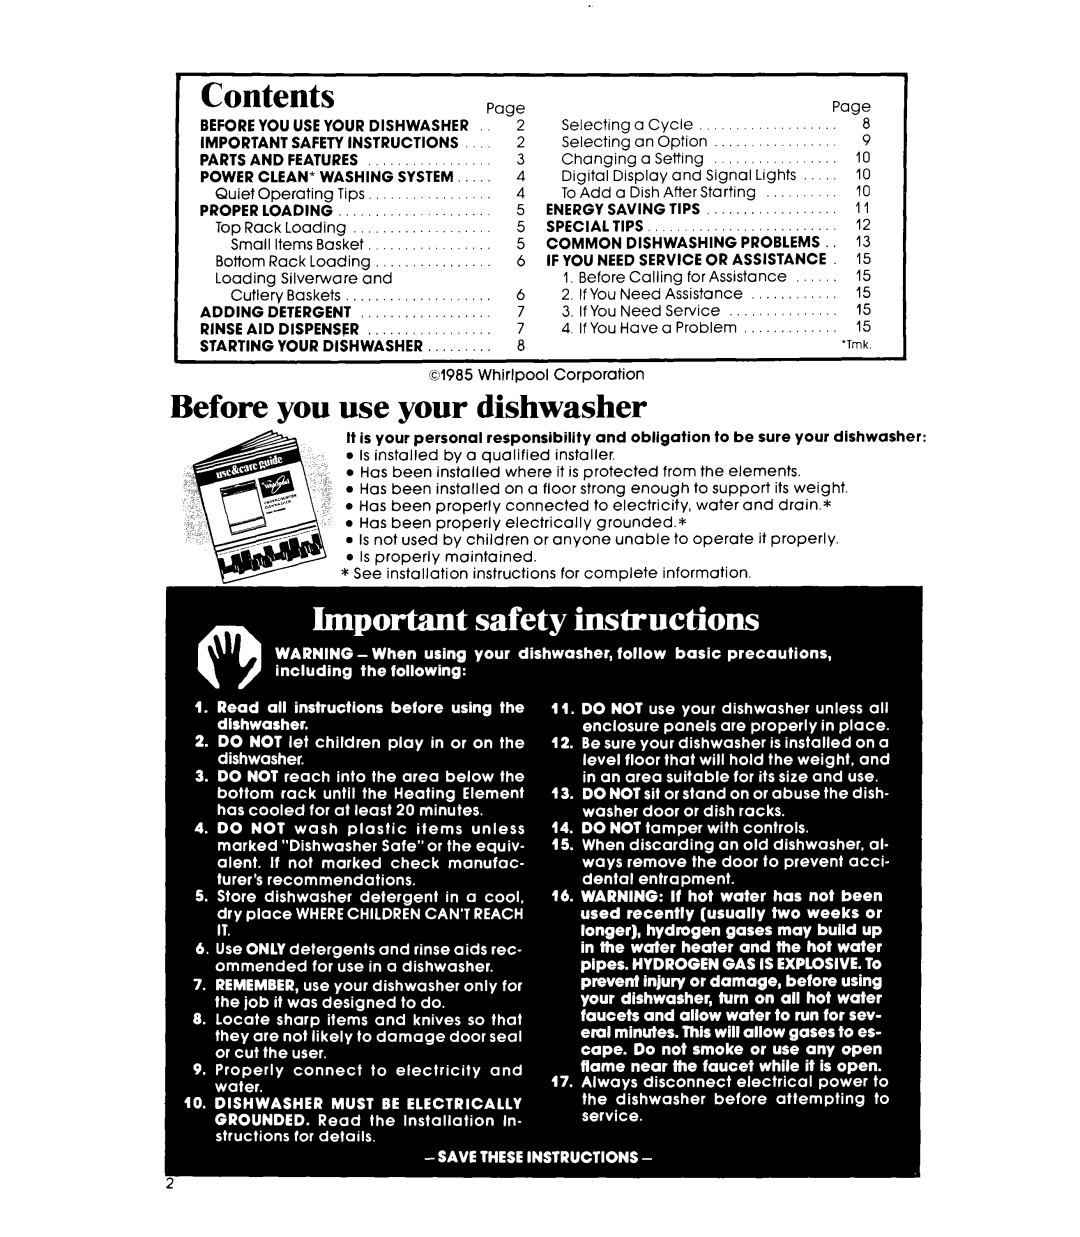 Whirlpool DU9900XR manual Contents, Before you use your dishwasher 